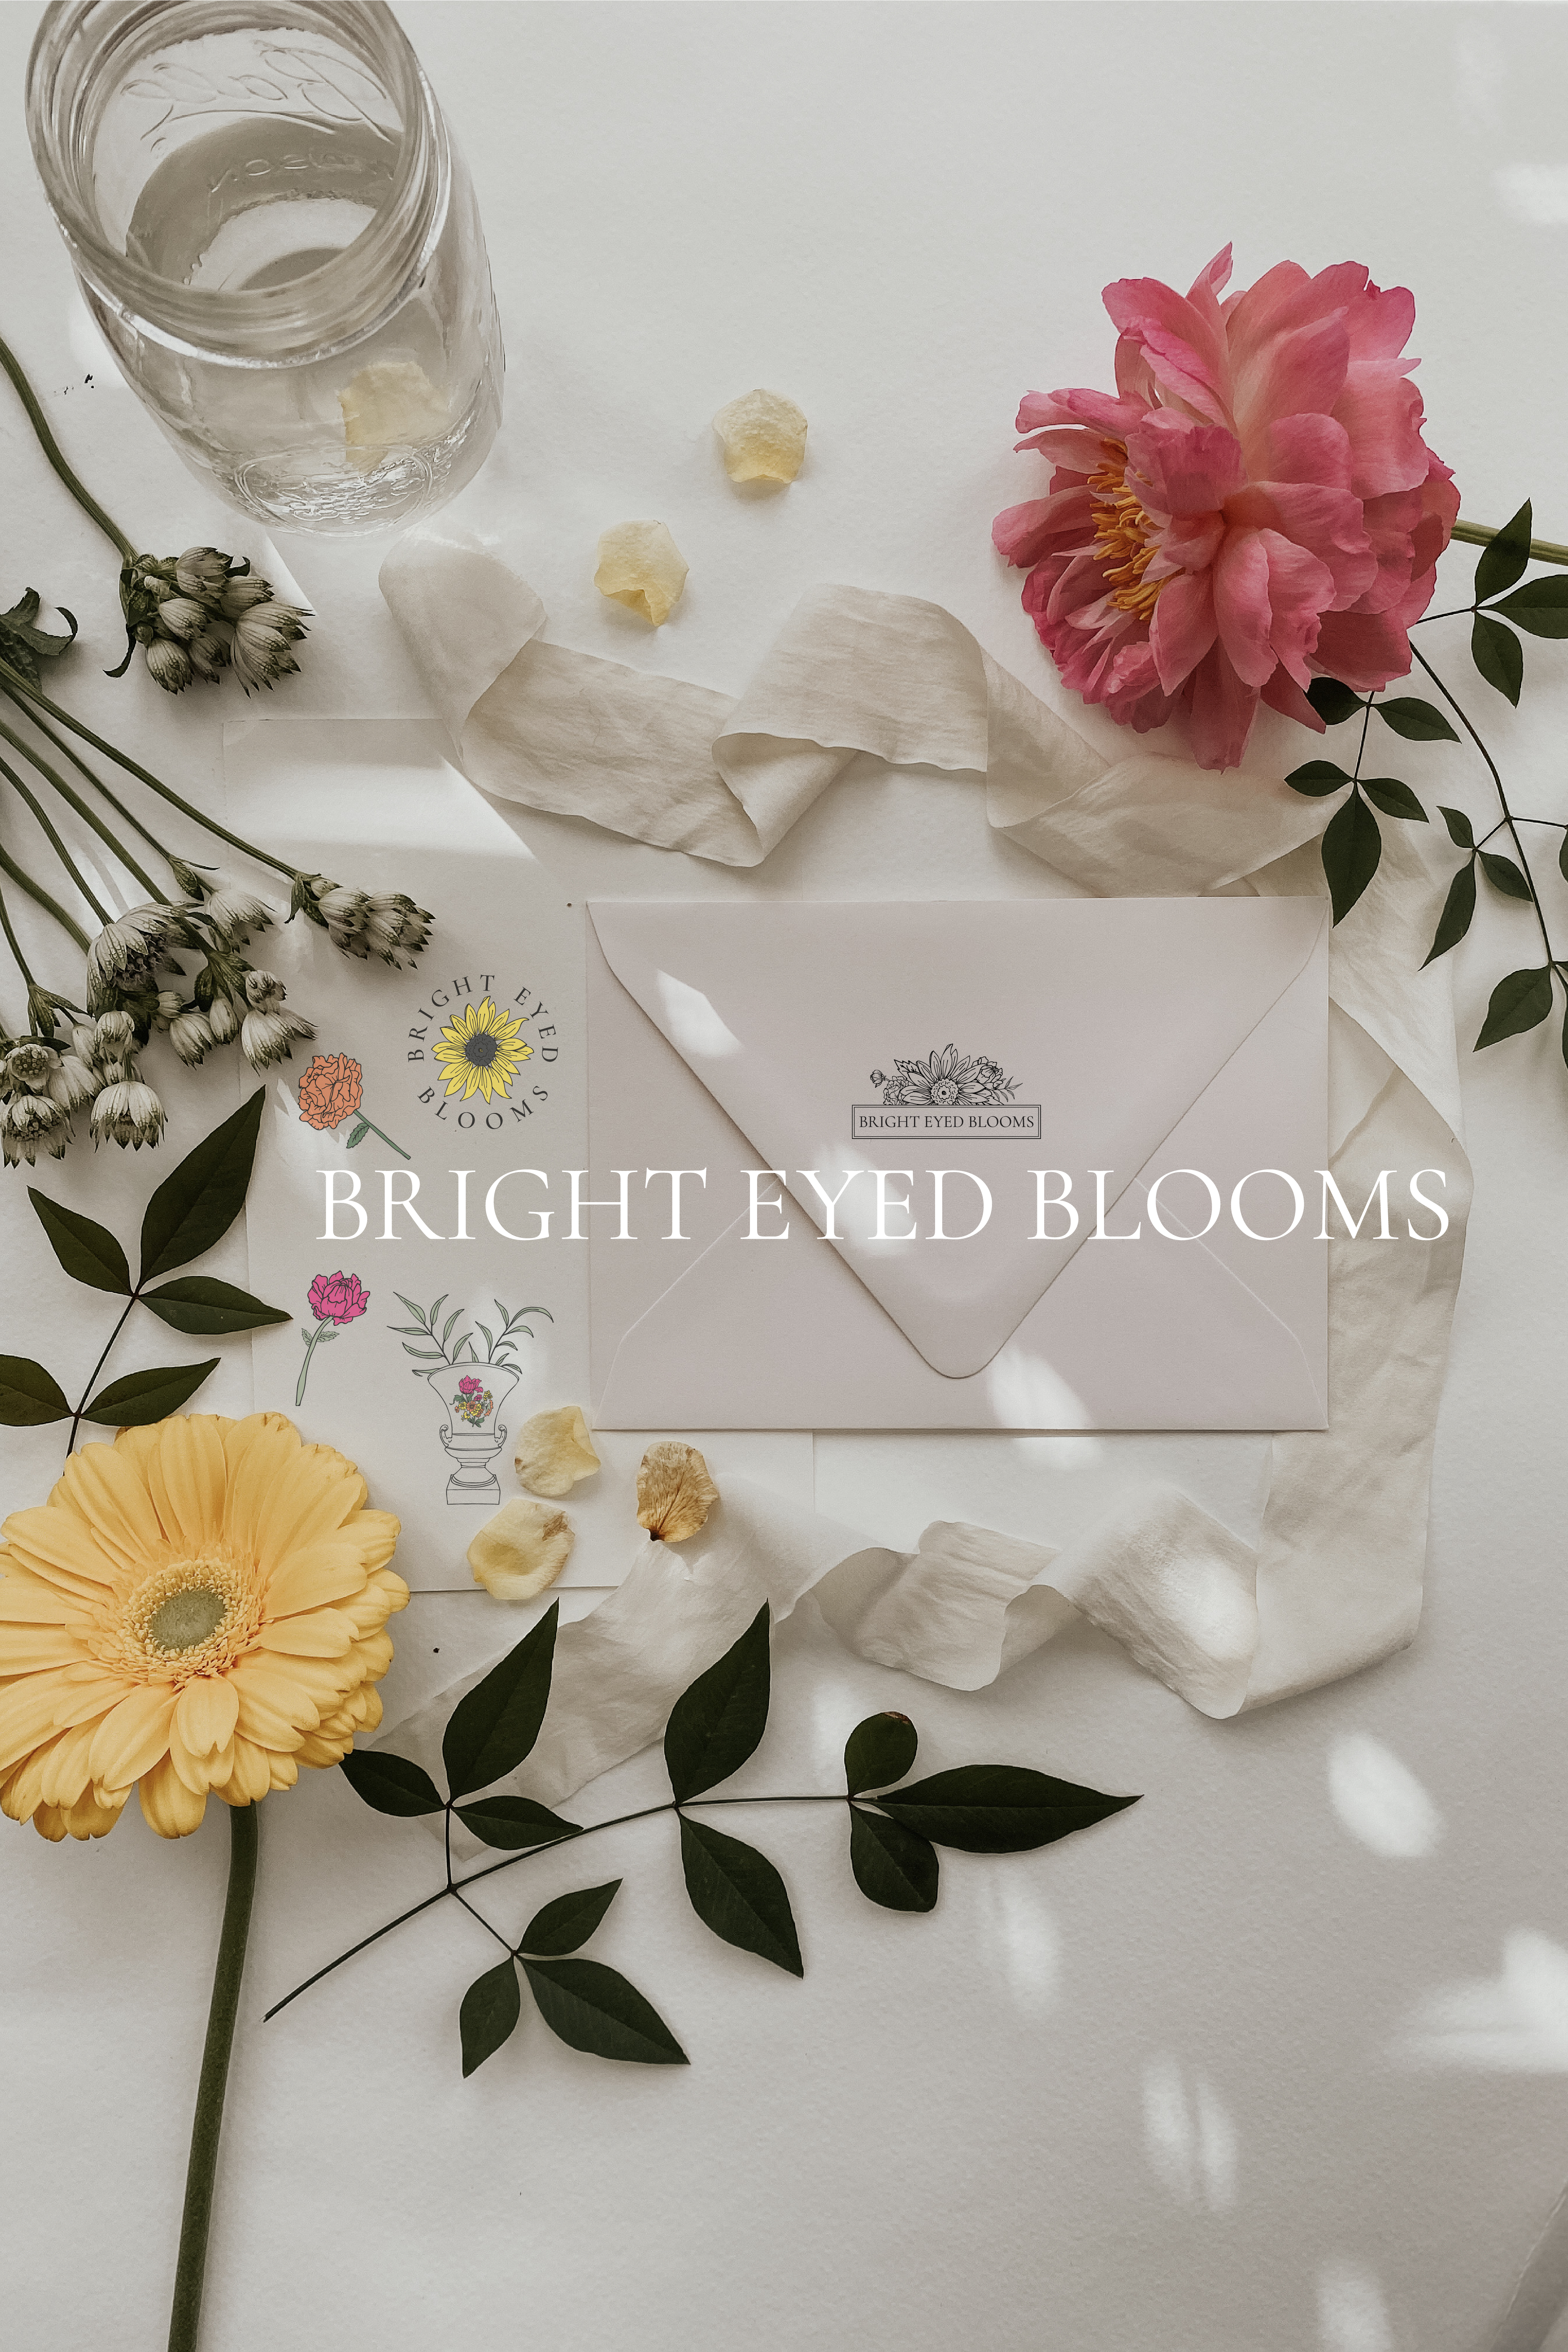 Bright Eyed Blooms Brand Reveal